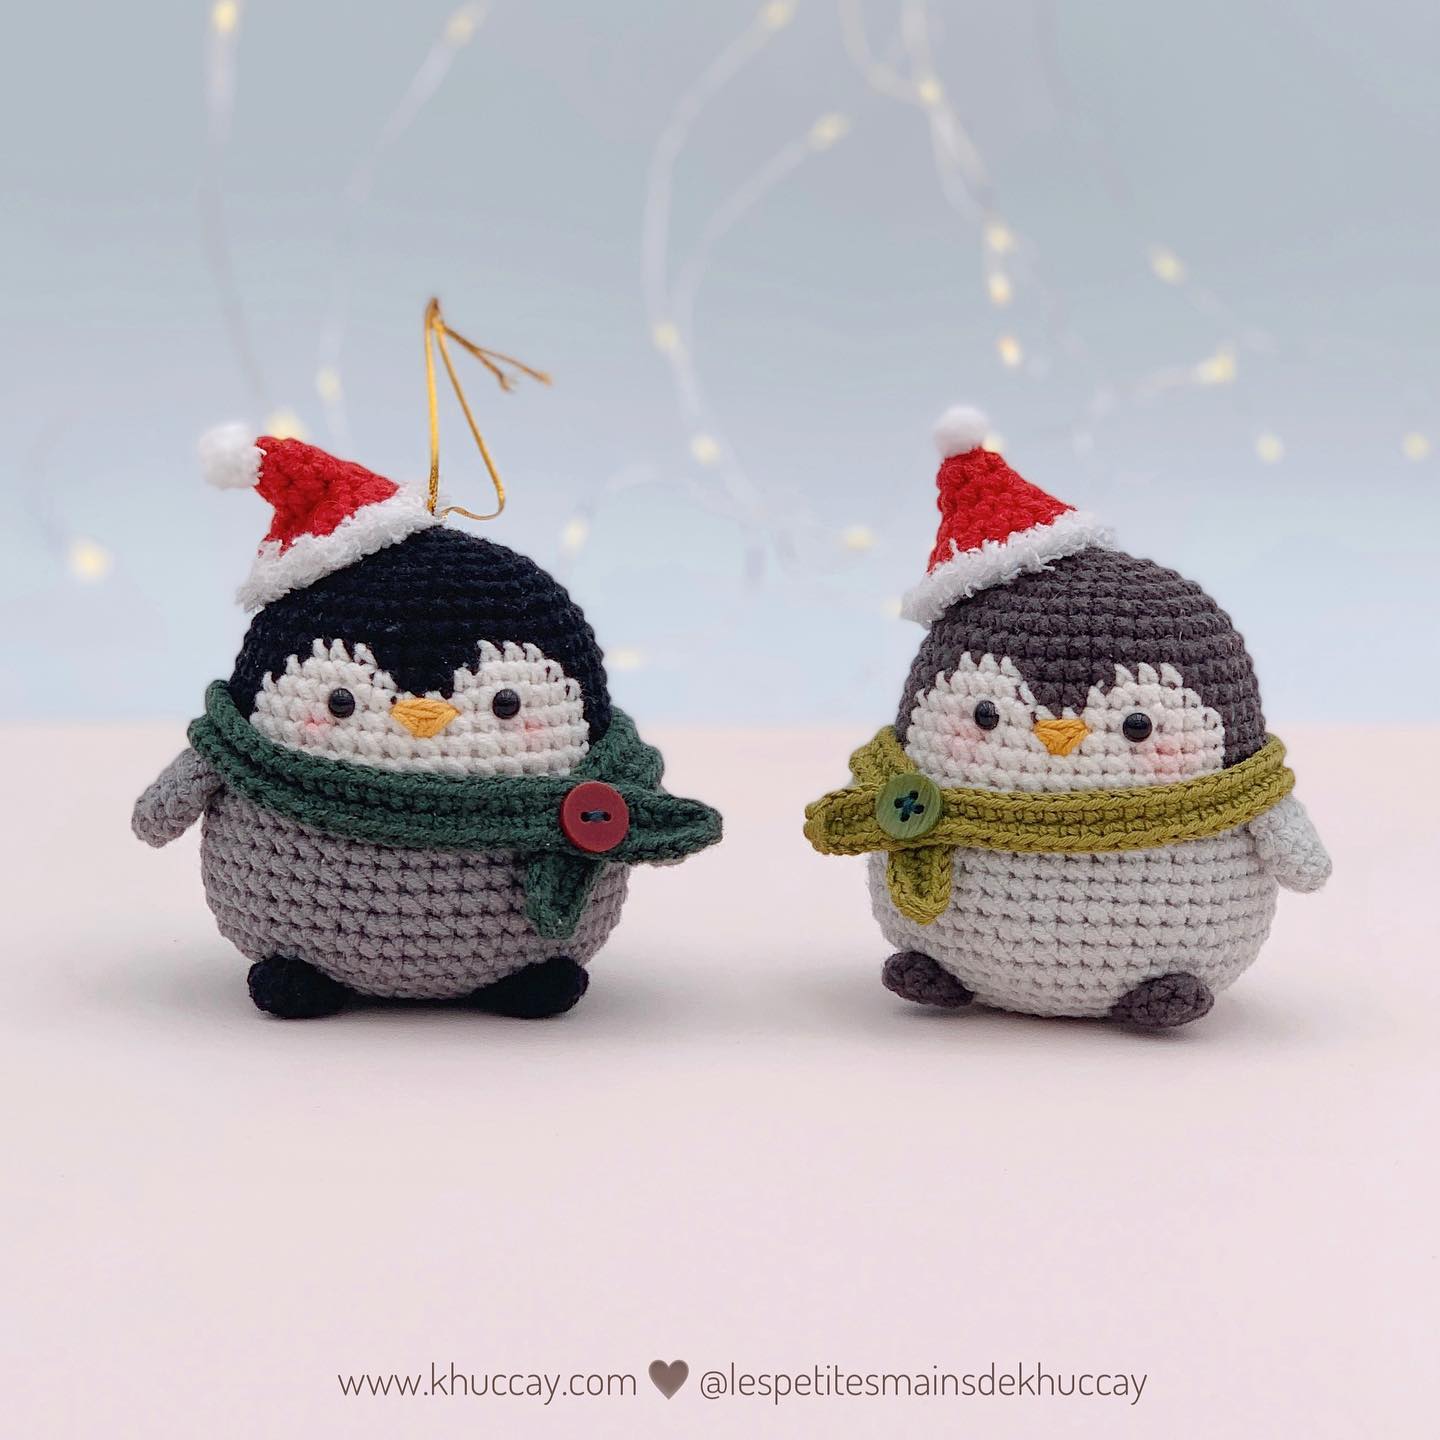 Because you guys are making these baby penguins and tagging me in your posts and they all bright up my winter days 🎄 it makes me me want to repost about it too 😊
Free crochet pattern “Pew the baby penguin” is always available on my blog (in 4 different languages - English, French, Spanish & Vietnamese) >> https://khuccay.com/crochet-pattern-blog/
So if you’re looking for a last-minute project, let’s go 🐧